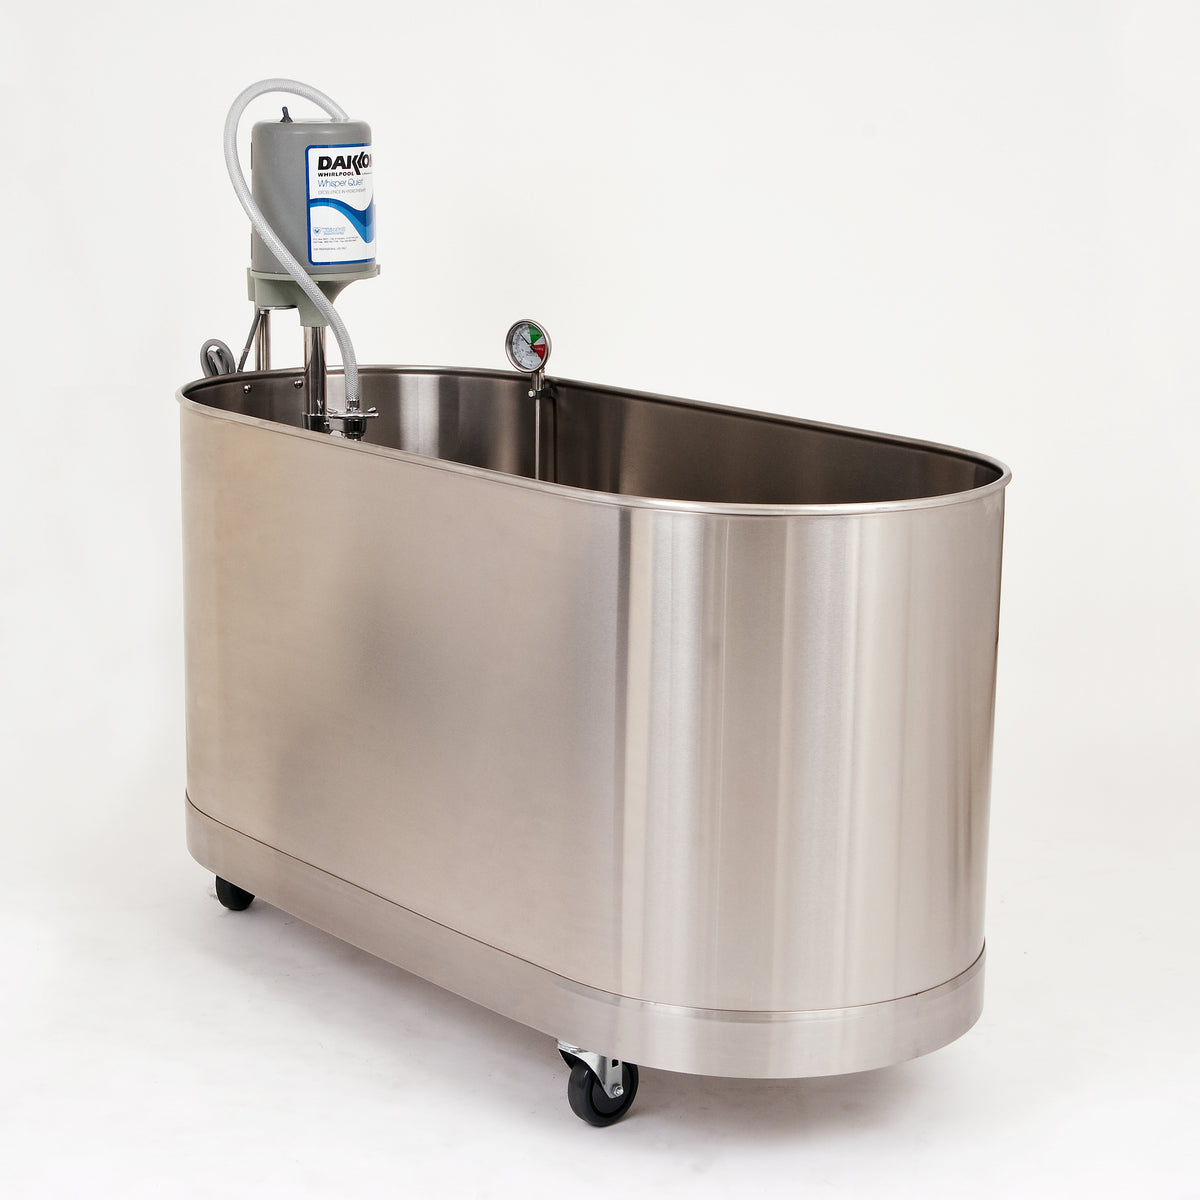 Whitehall Whirlpool 85 Gallon Mobile Cold Tank - TRH Services